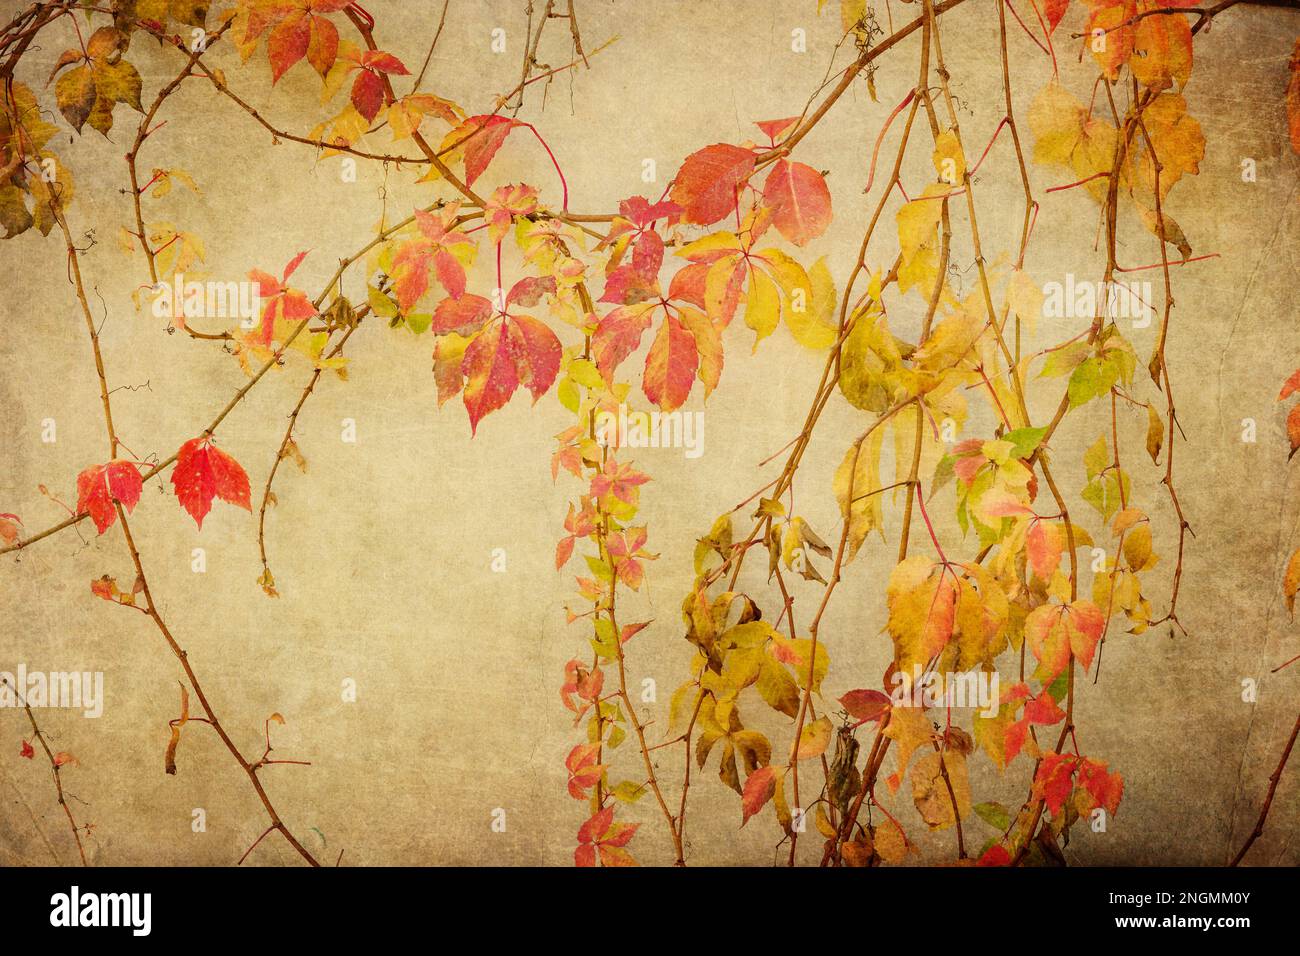 decorative textured background image with autumn colored grapevines Stock Photo